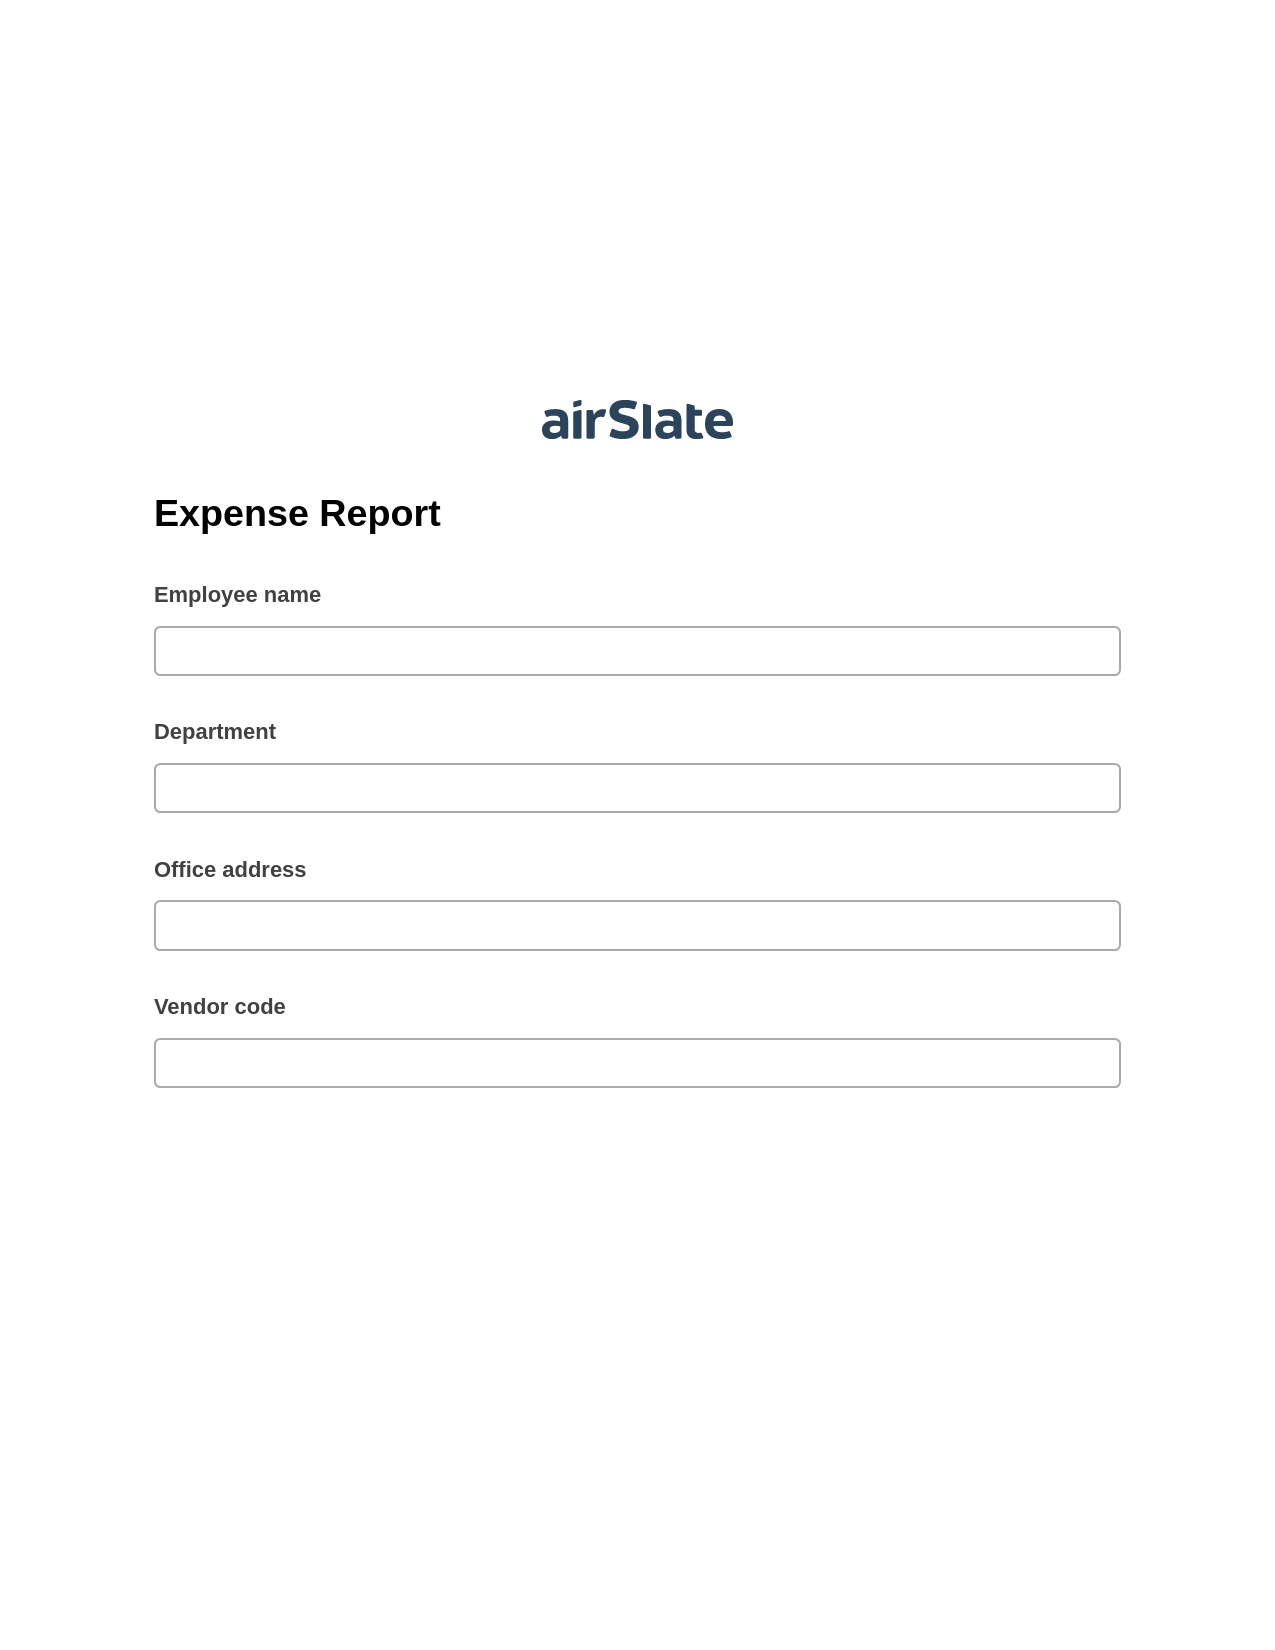 Expense Report System Bot - Slack Two-Way Binding Bot, Hide Signatures Bot, Export to Formstack Documents Bot